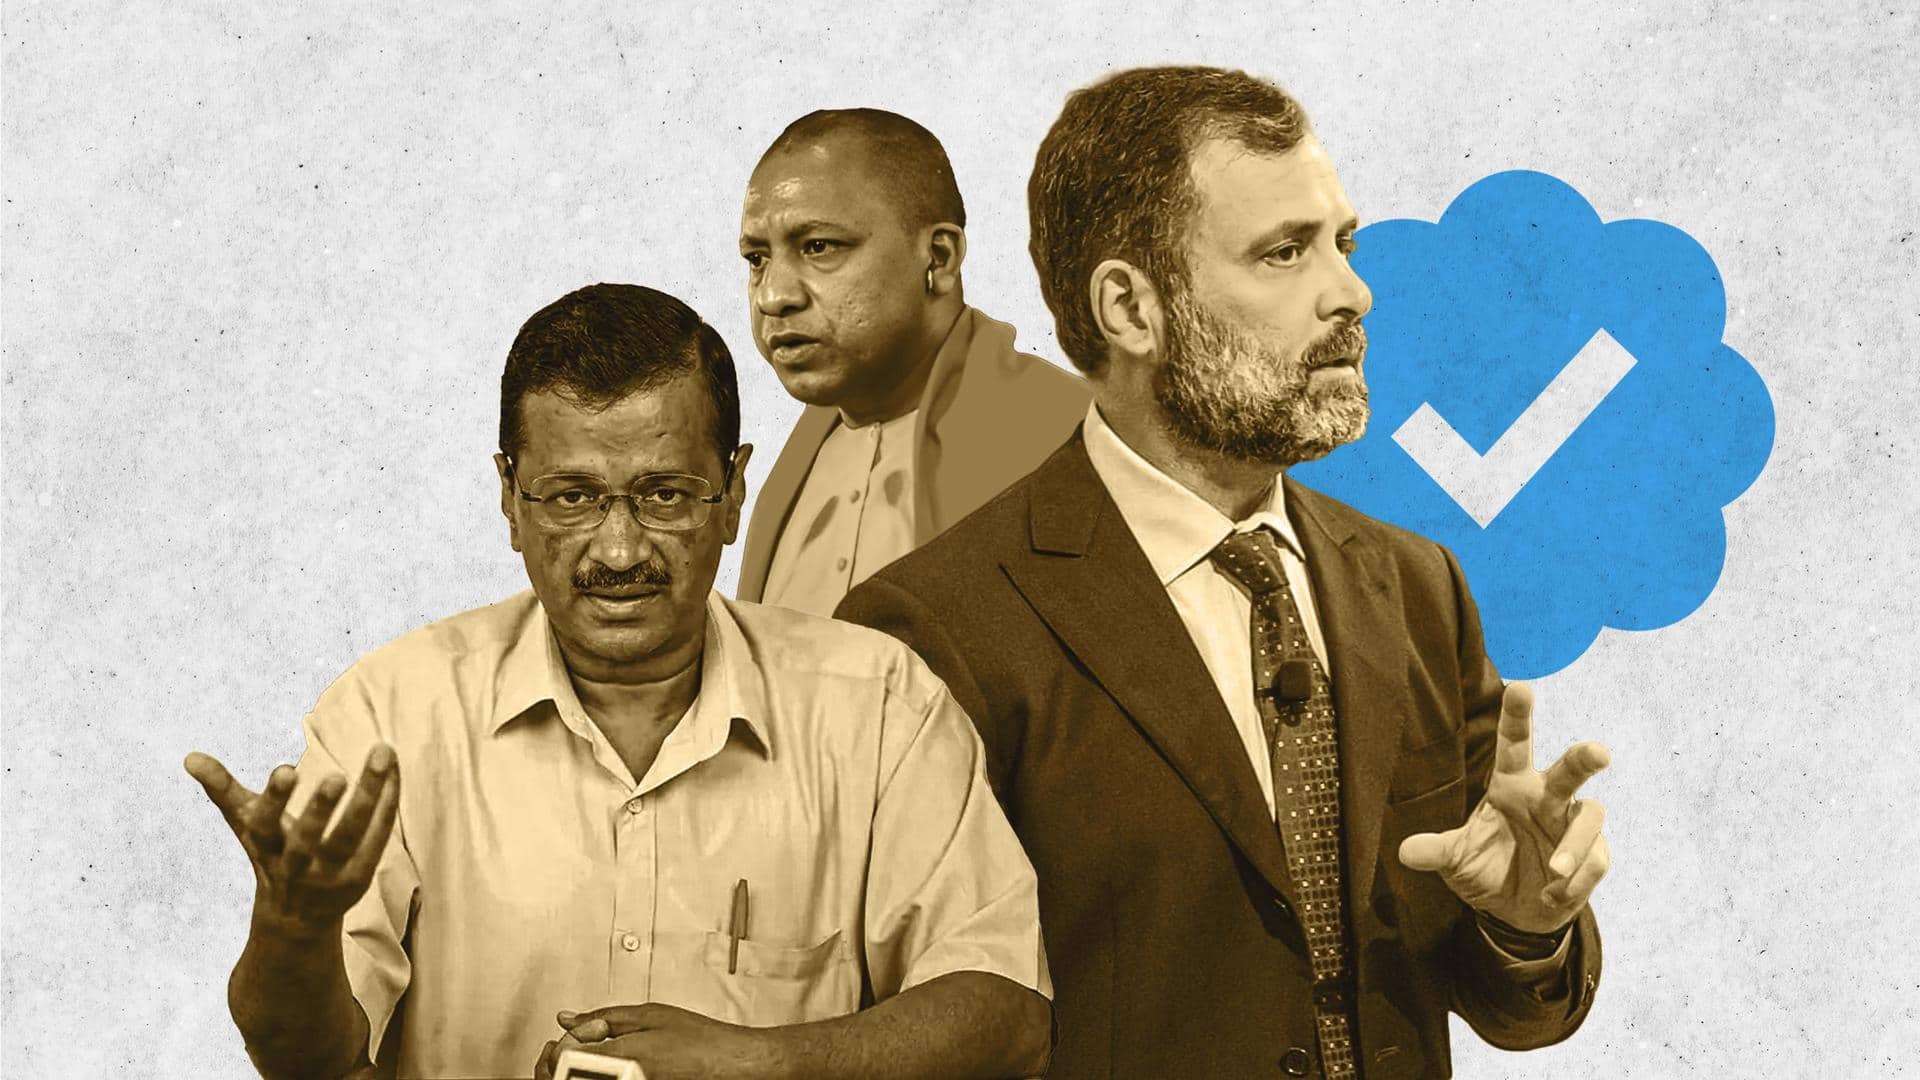 From Kejriwal to Adityanath: Top politicians lose Twitter 'blue tick'